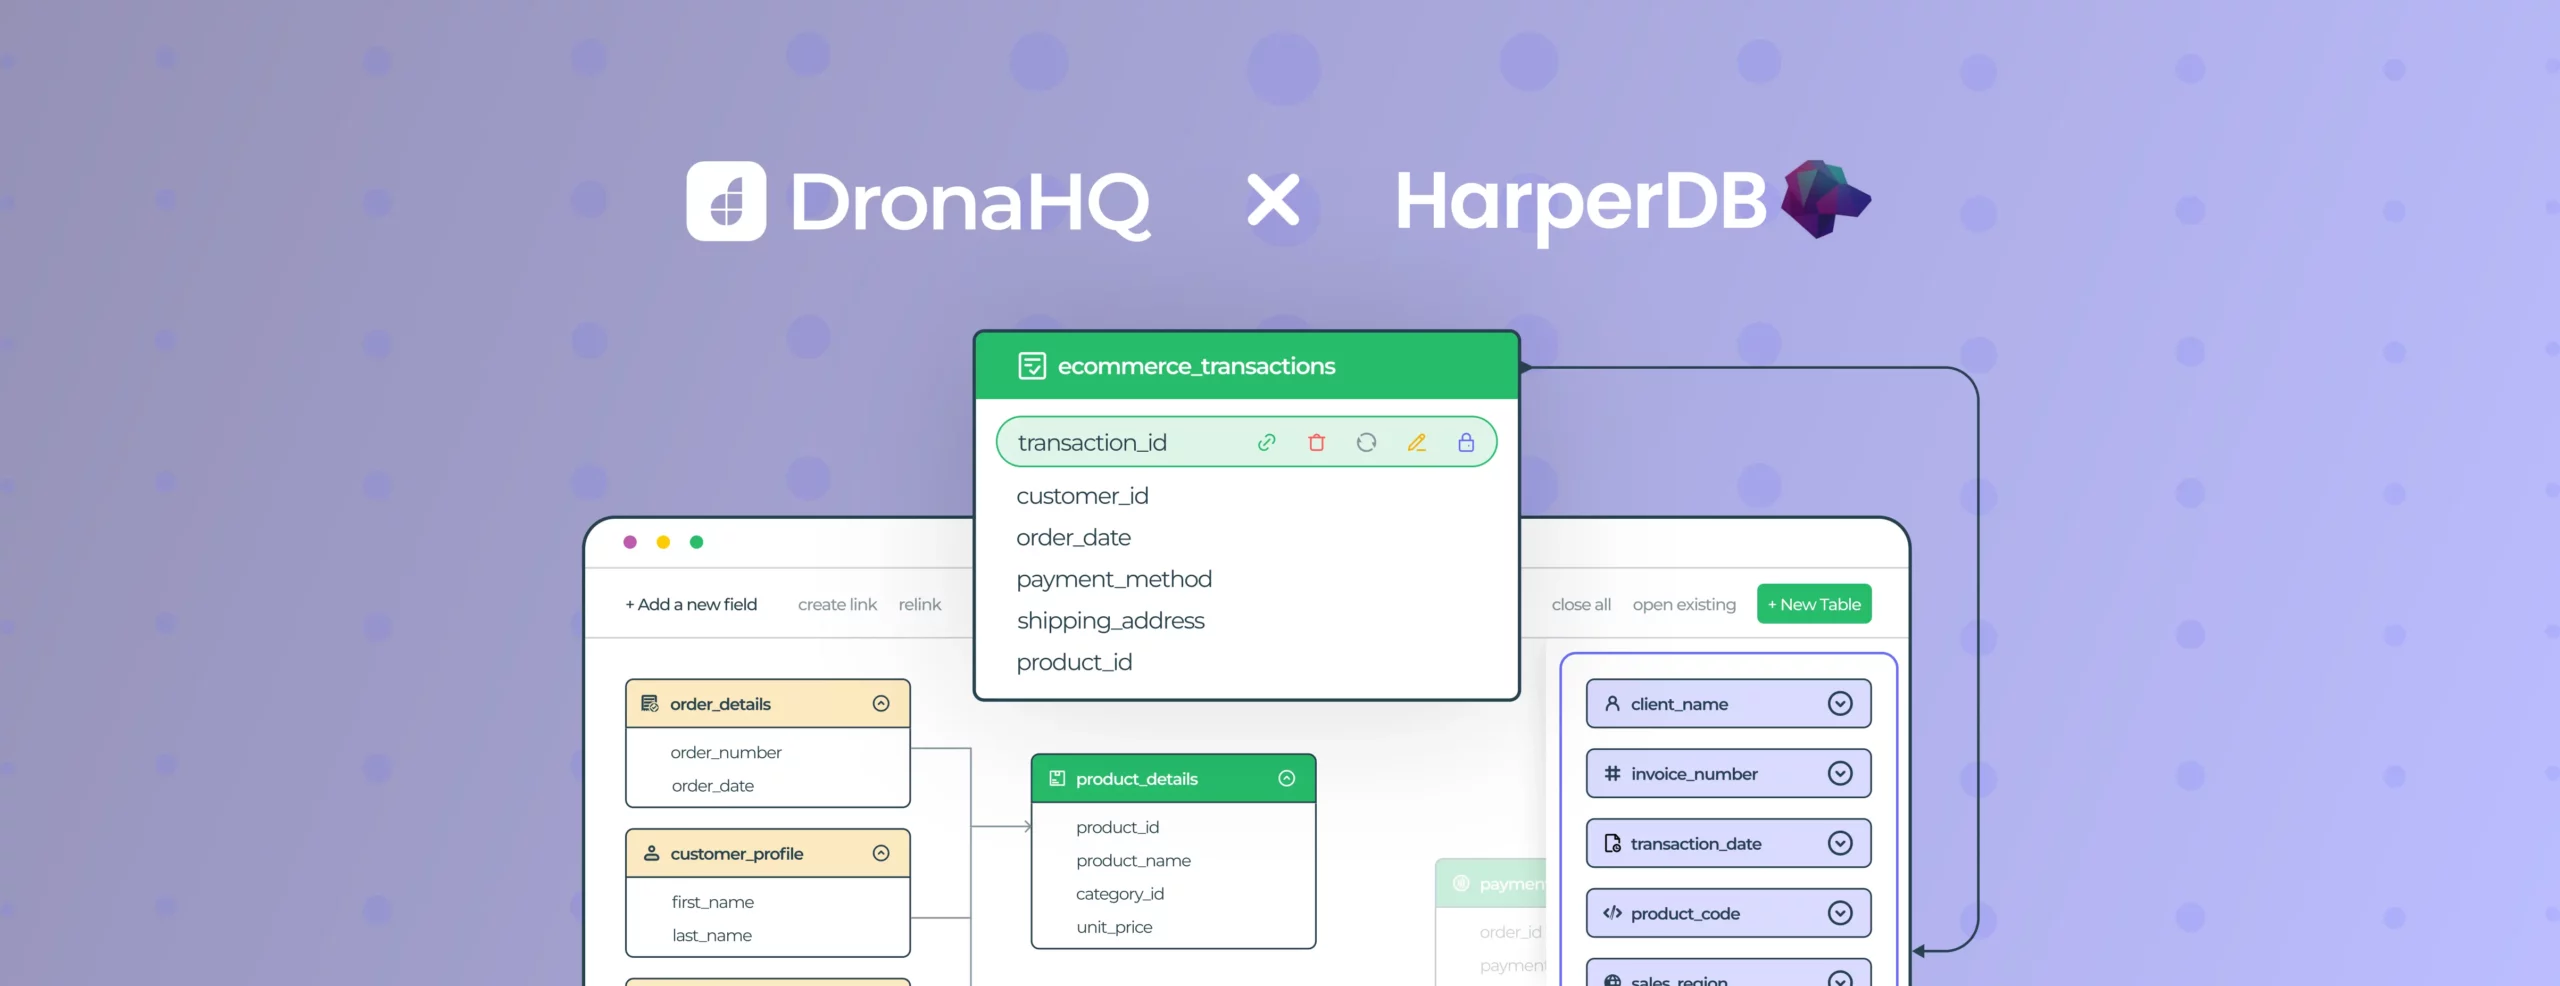 Building an inventory tool using DronaHQ and HarperDB